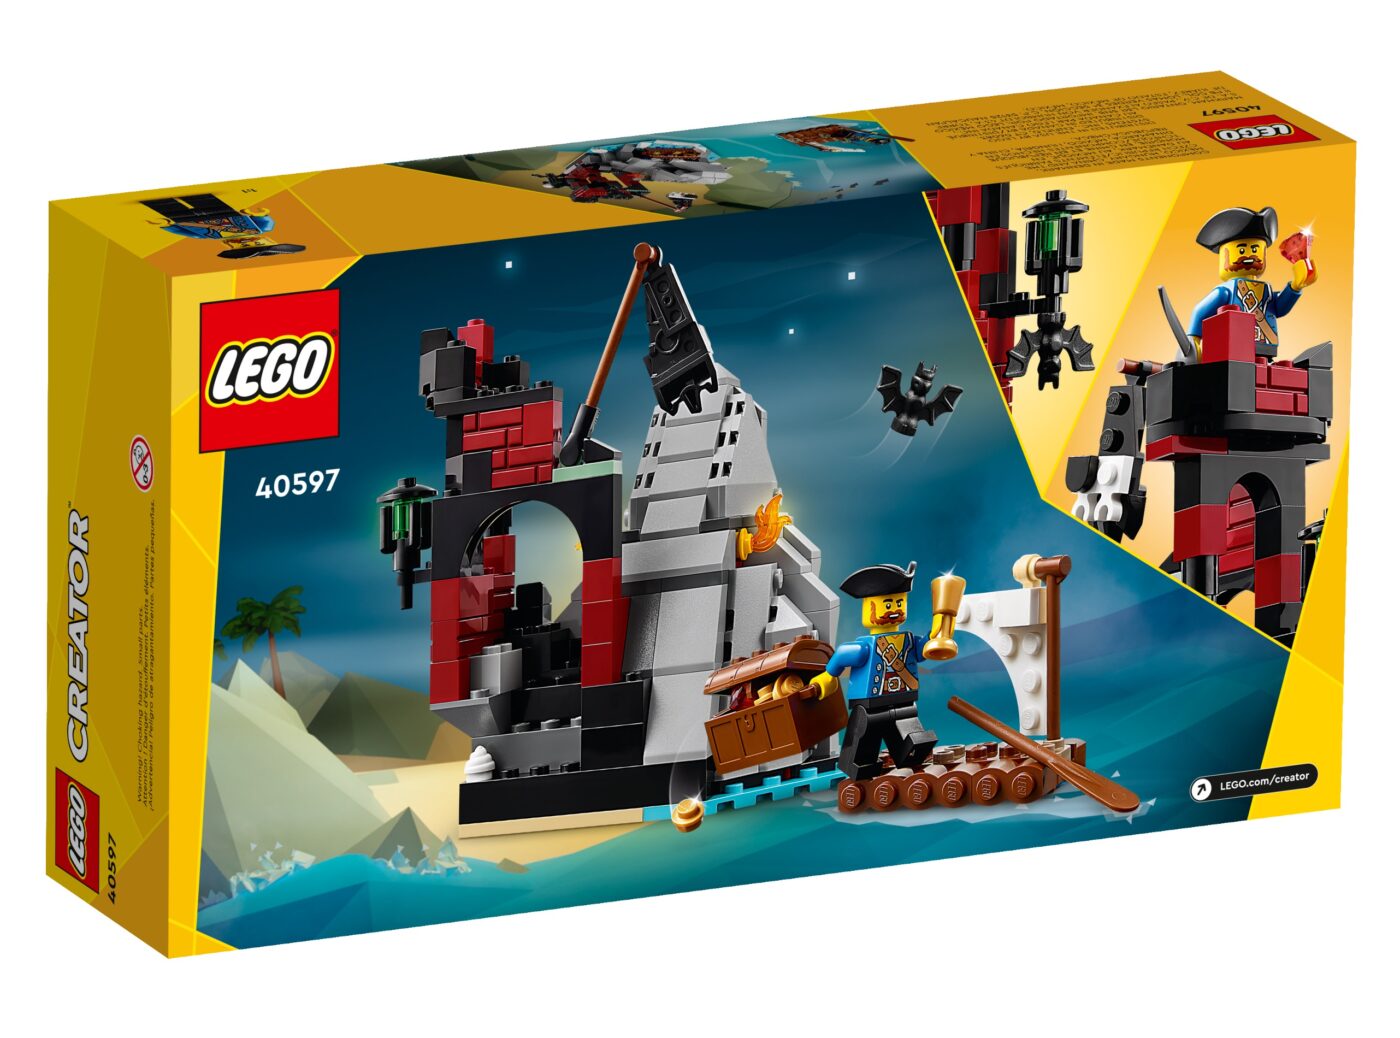 LEGO 40597 Scary Pirate Island GWP officially revealed - Jay's